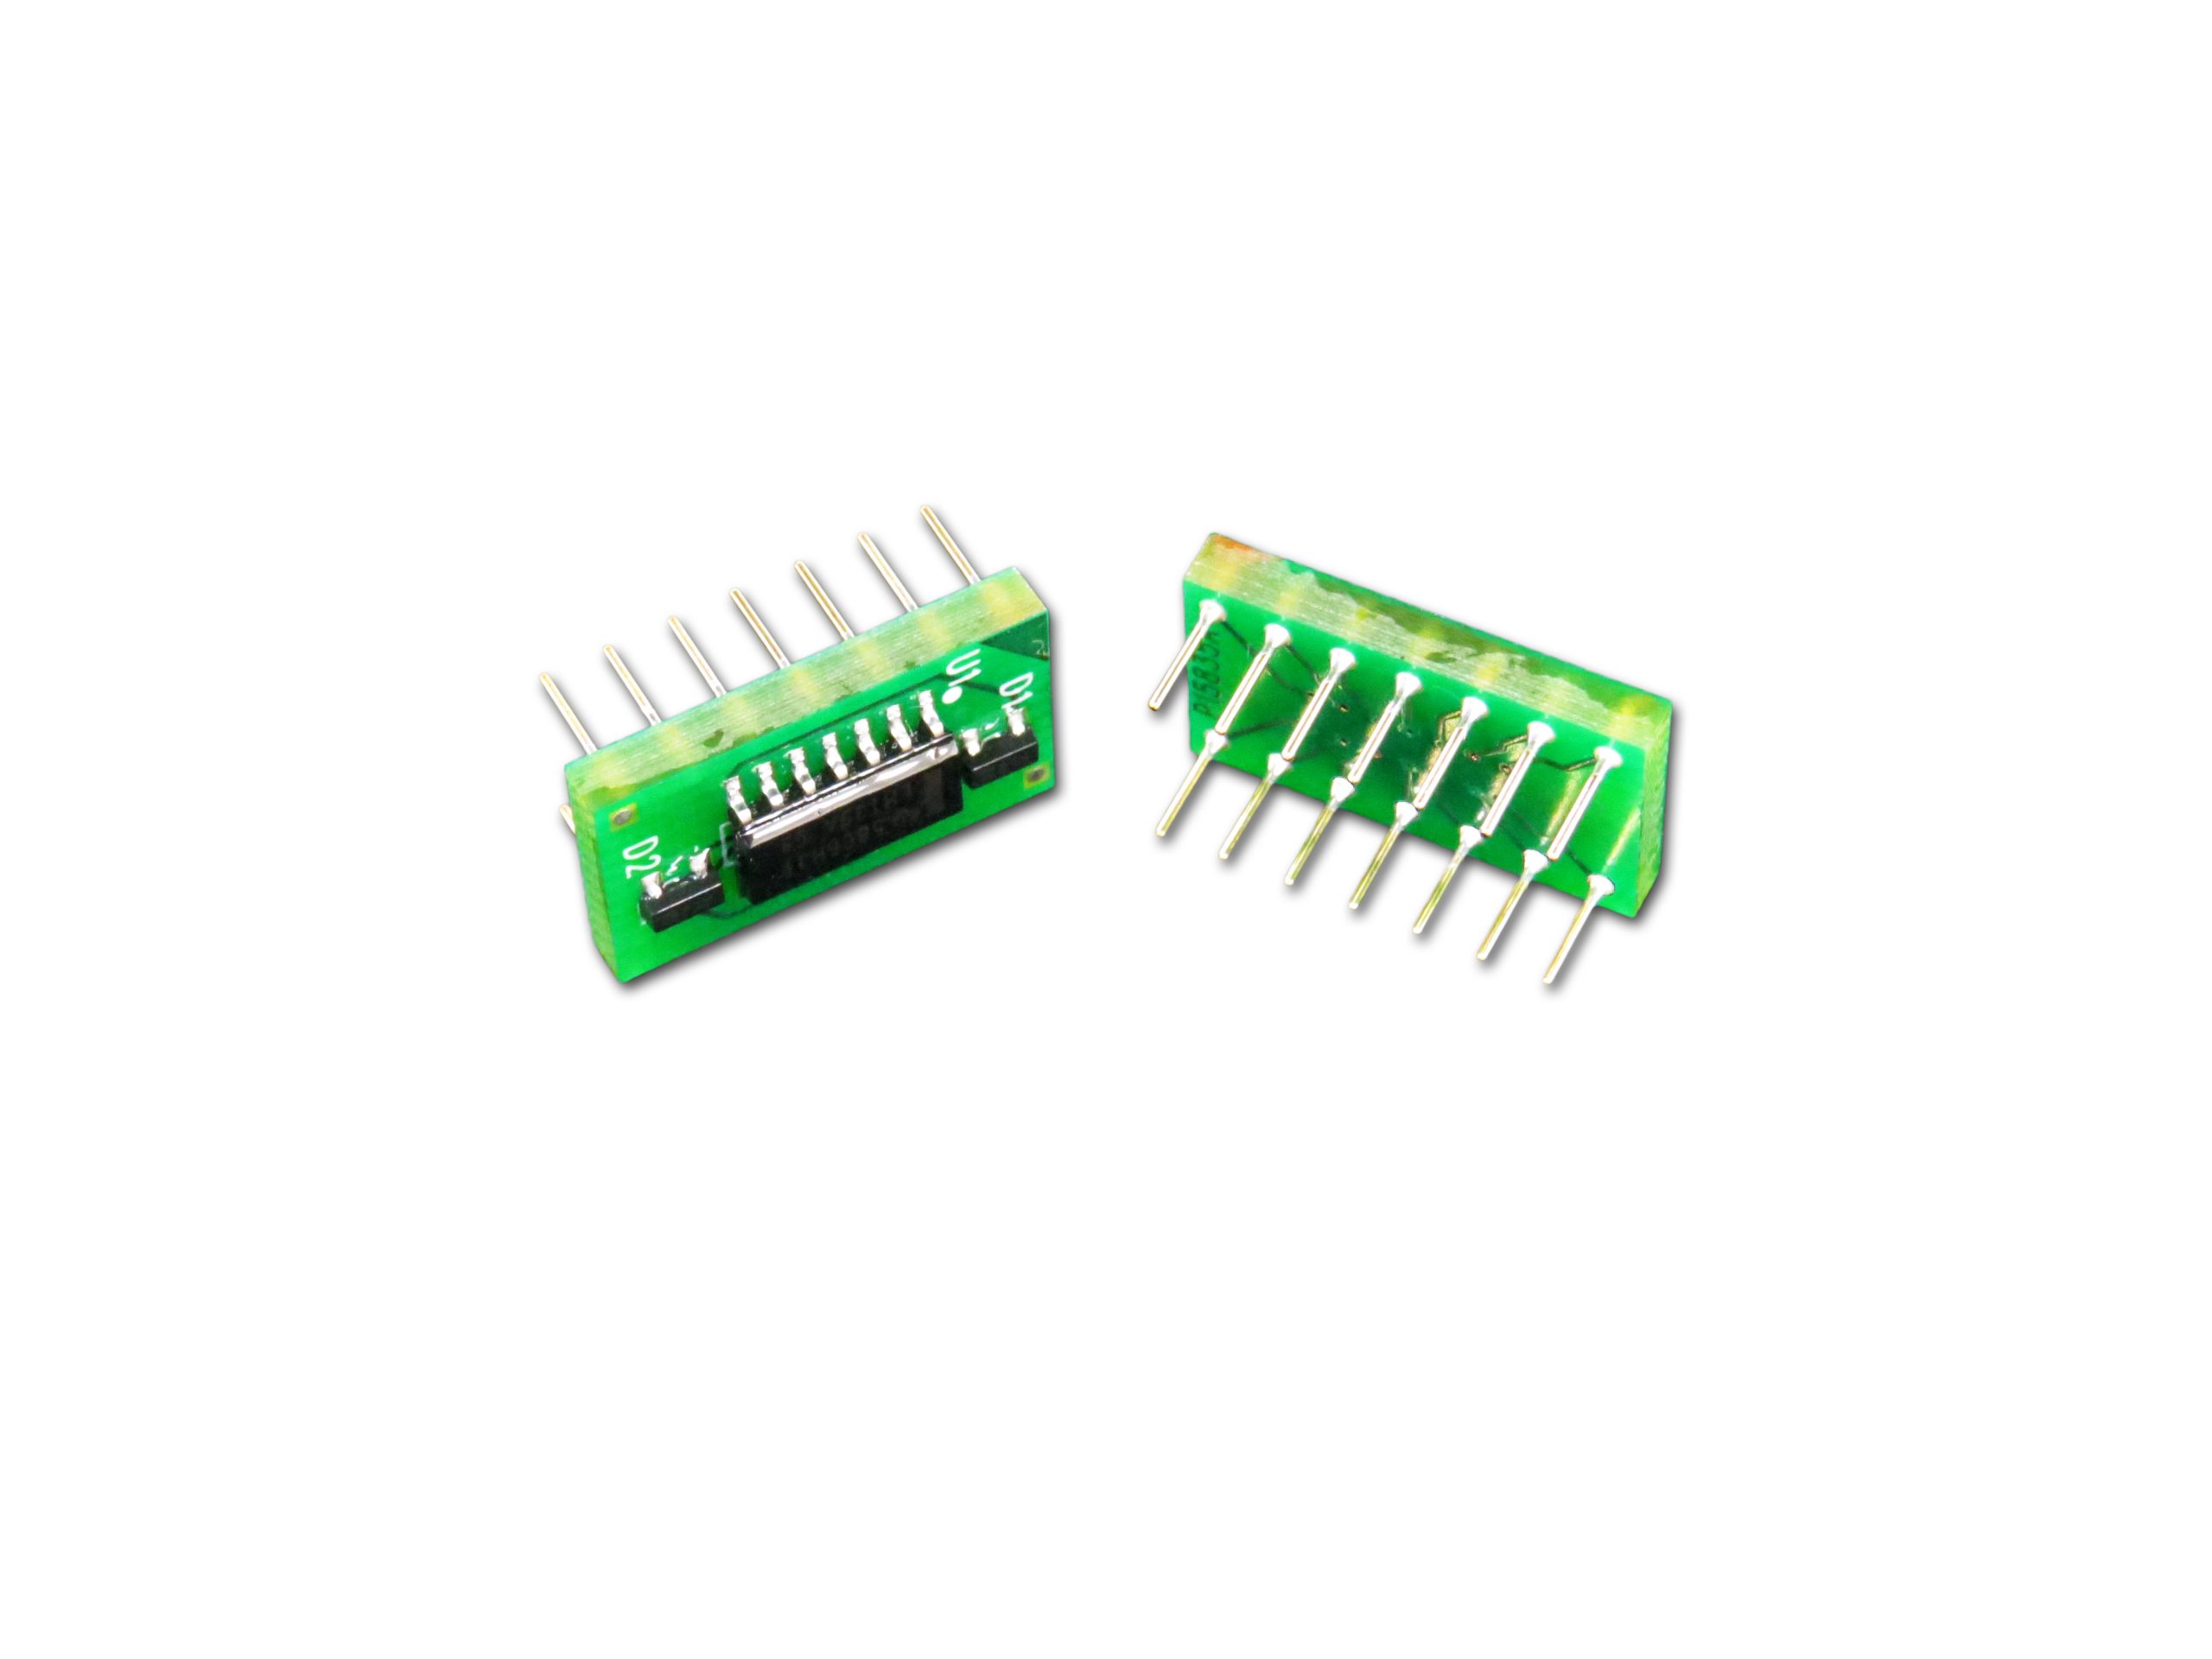 Package Converter Technology allows use of SMT devices on through hole PCB